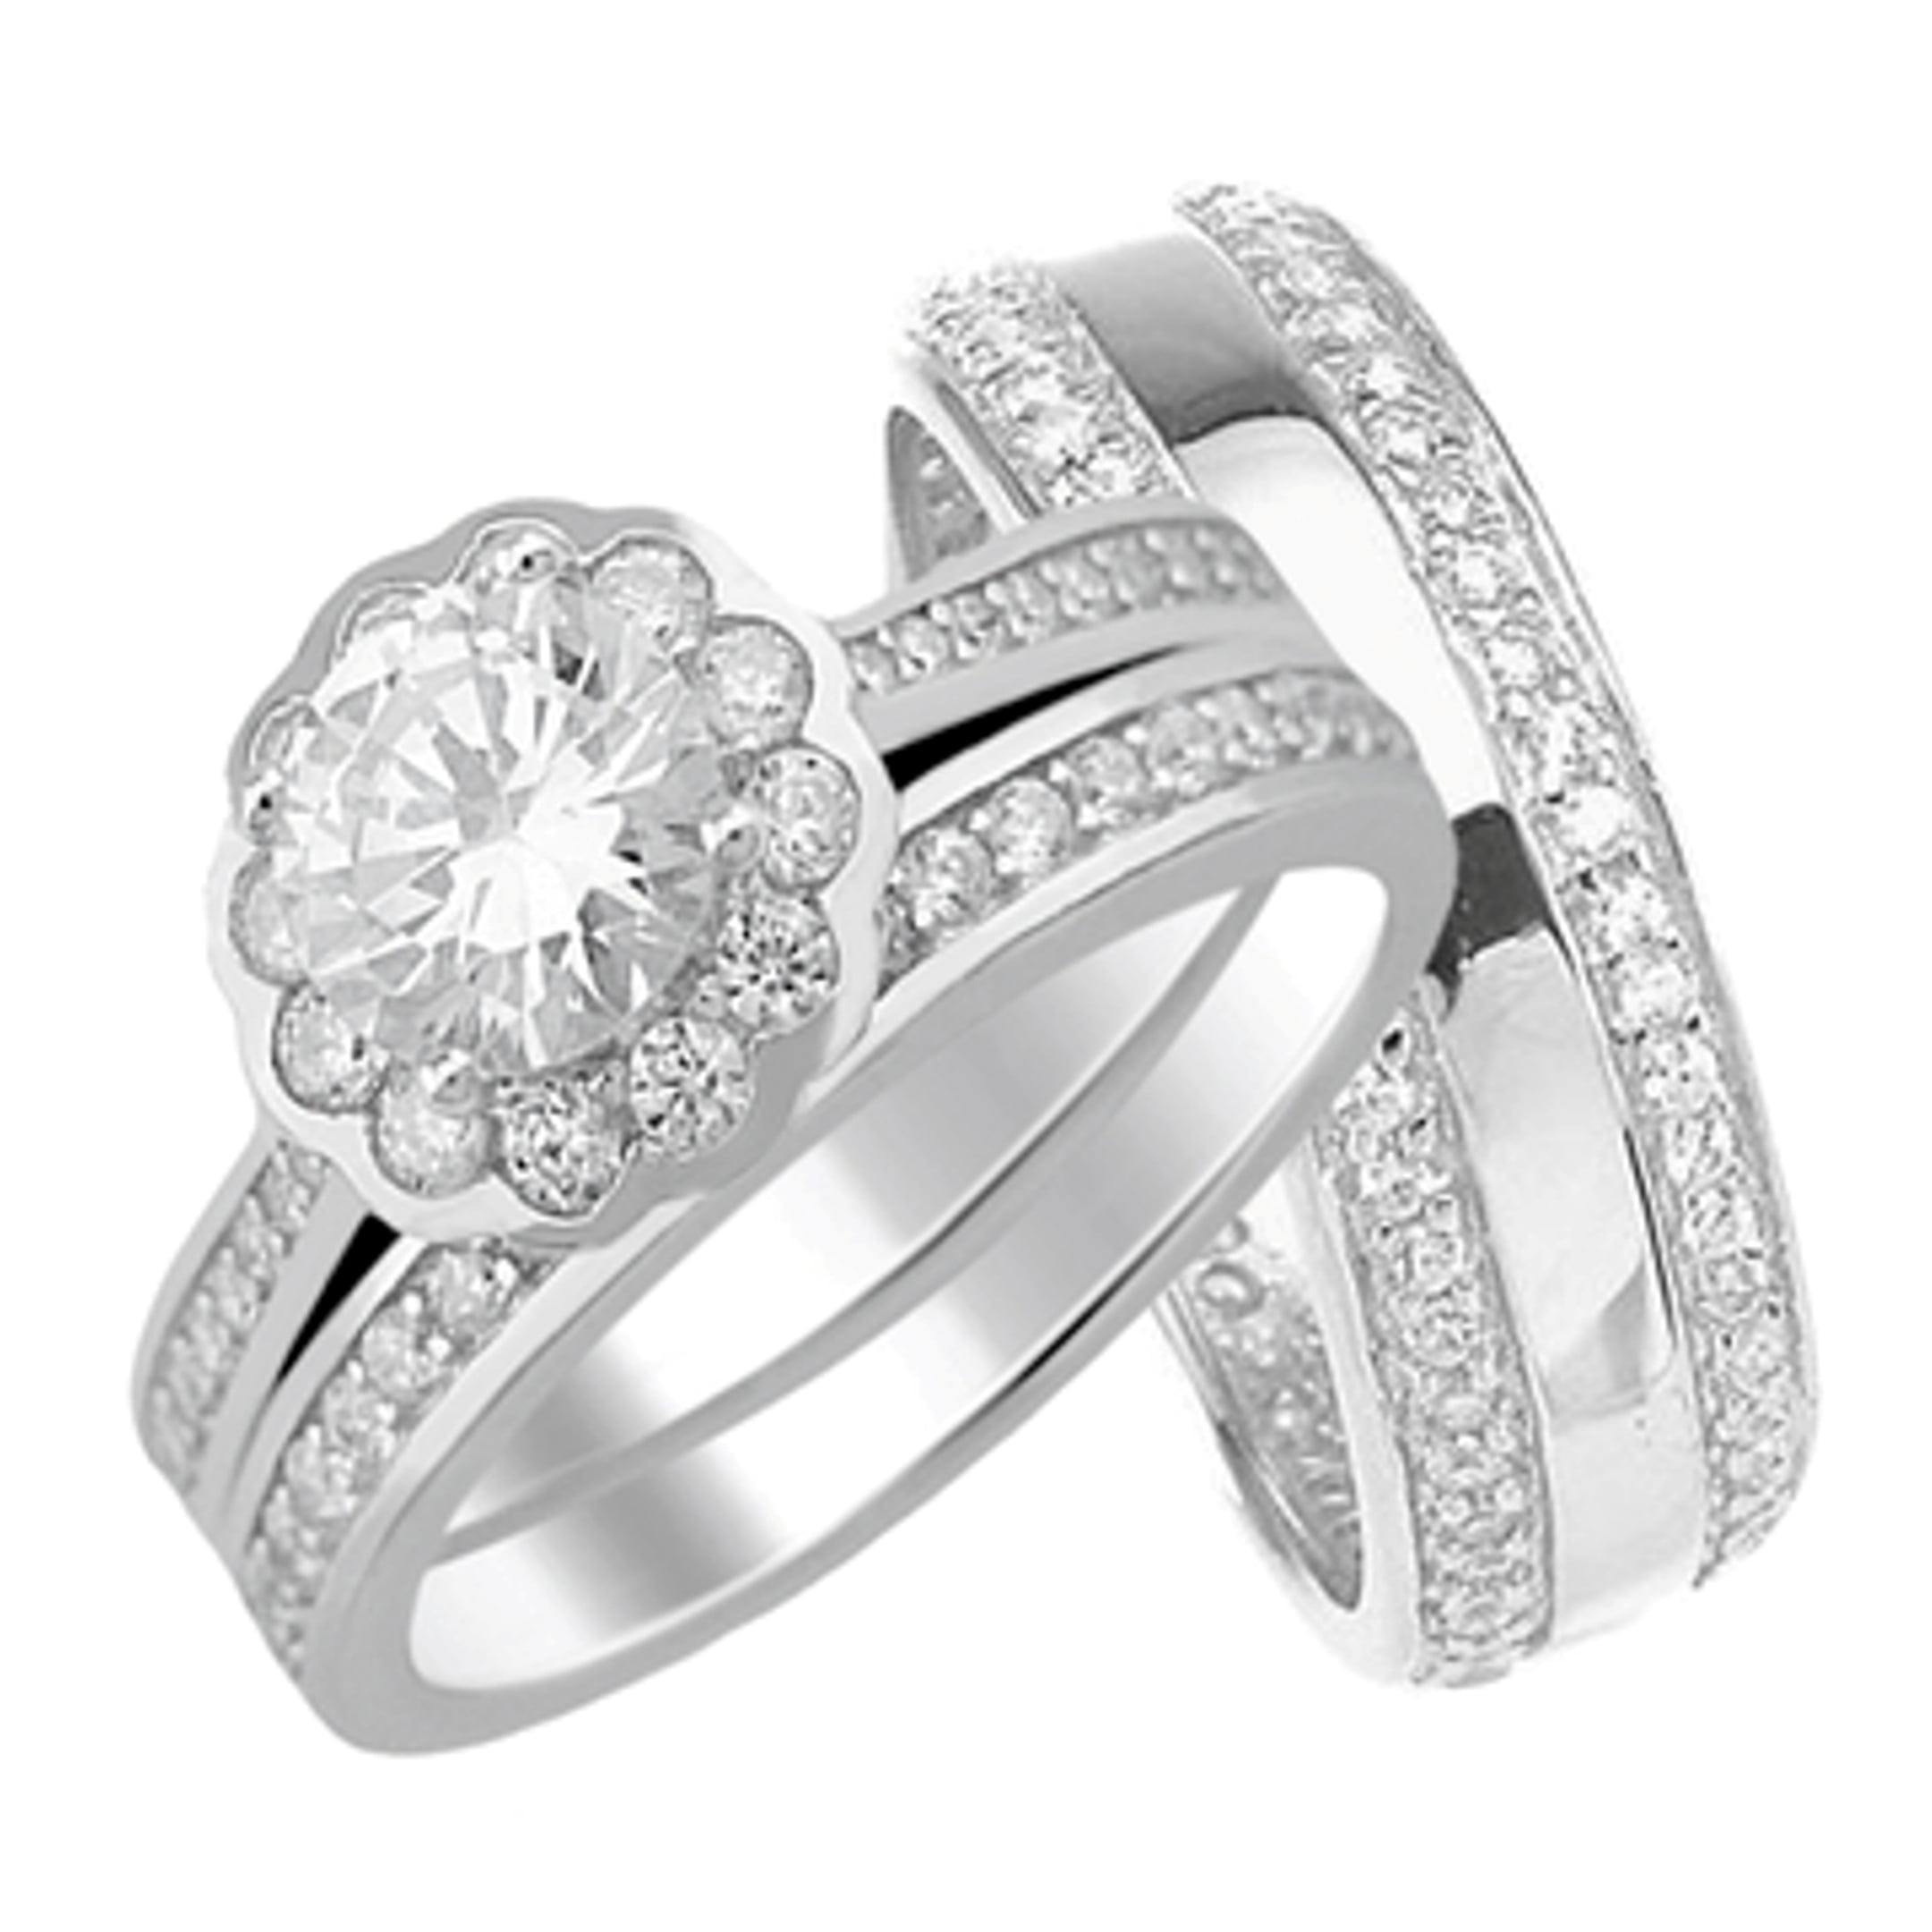 LaRaso Co His and Hers Halo Wedding  Ring  Set Matching 